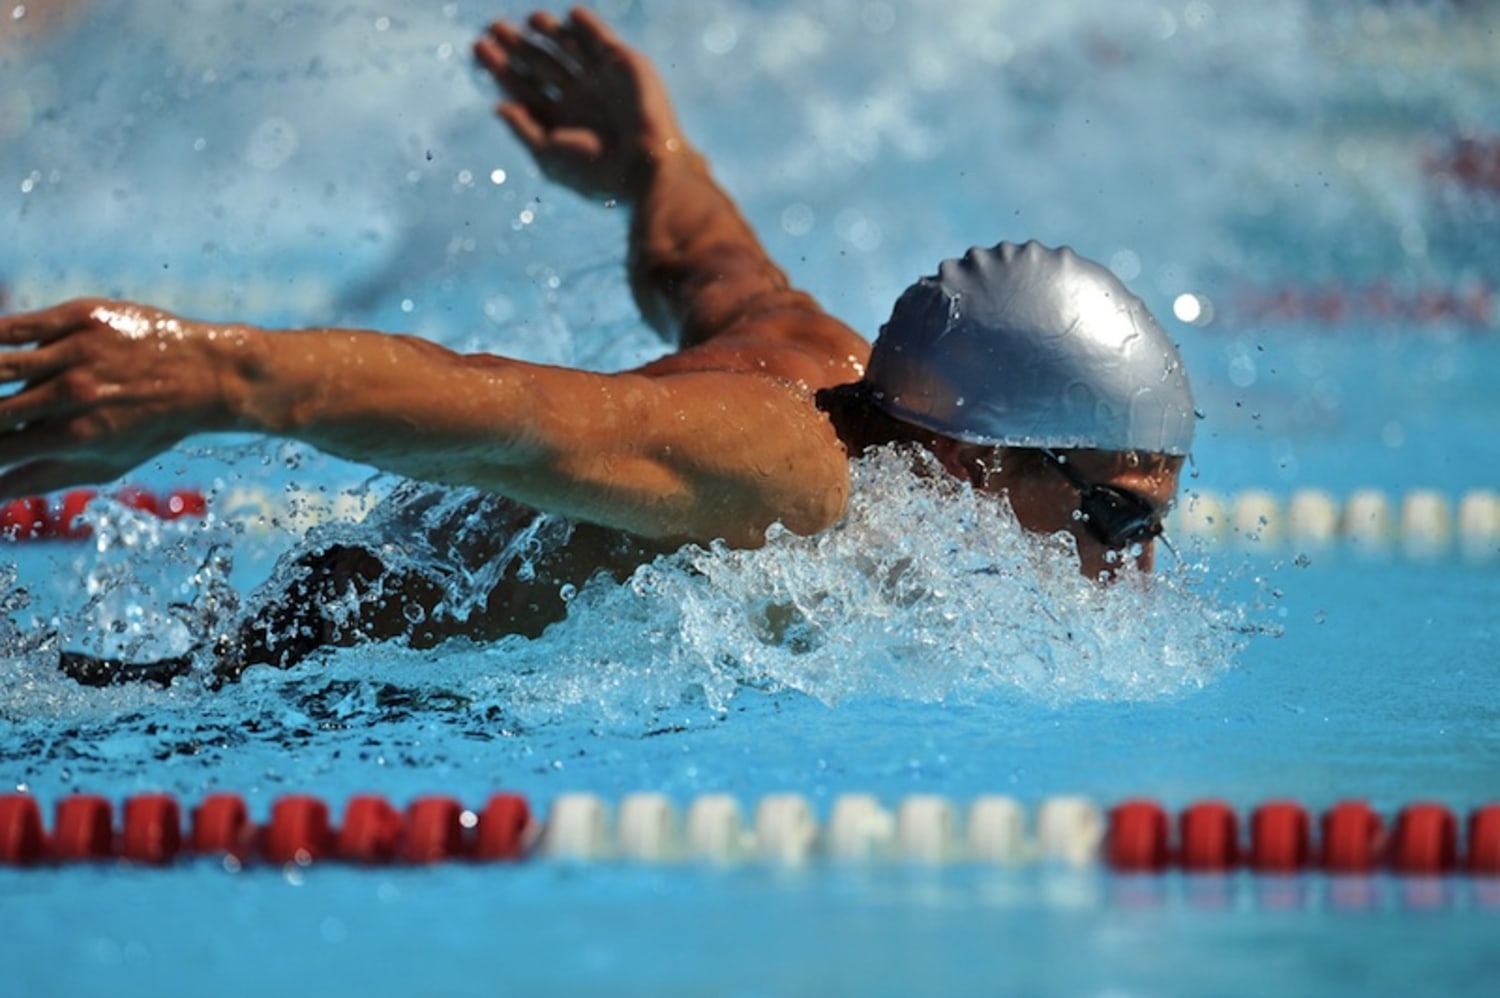 How much faster will using swimming fingers allow me to swim? - Quora